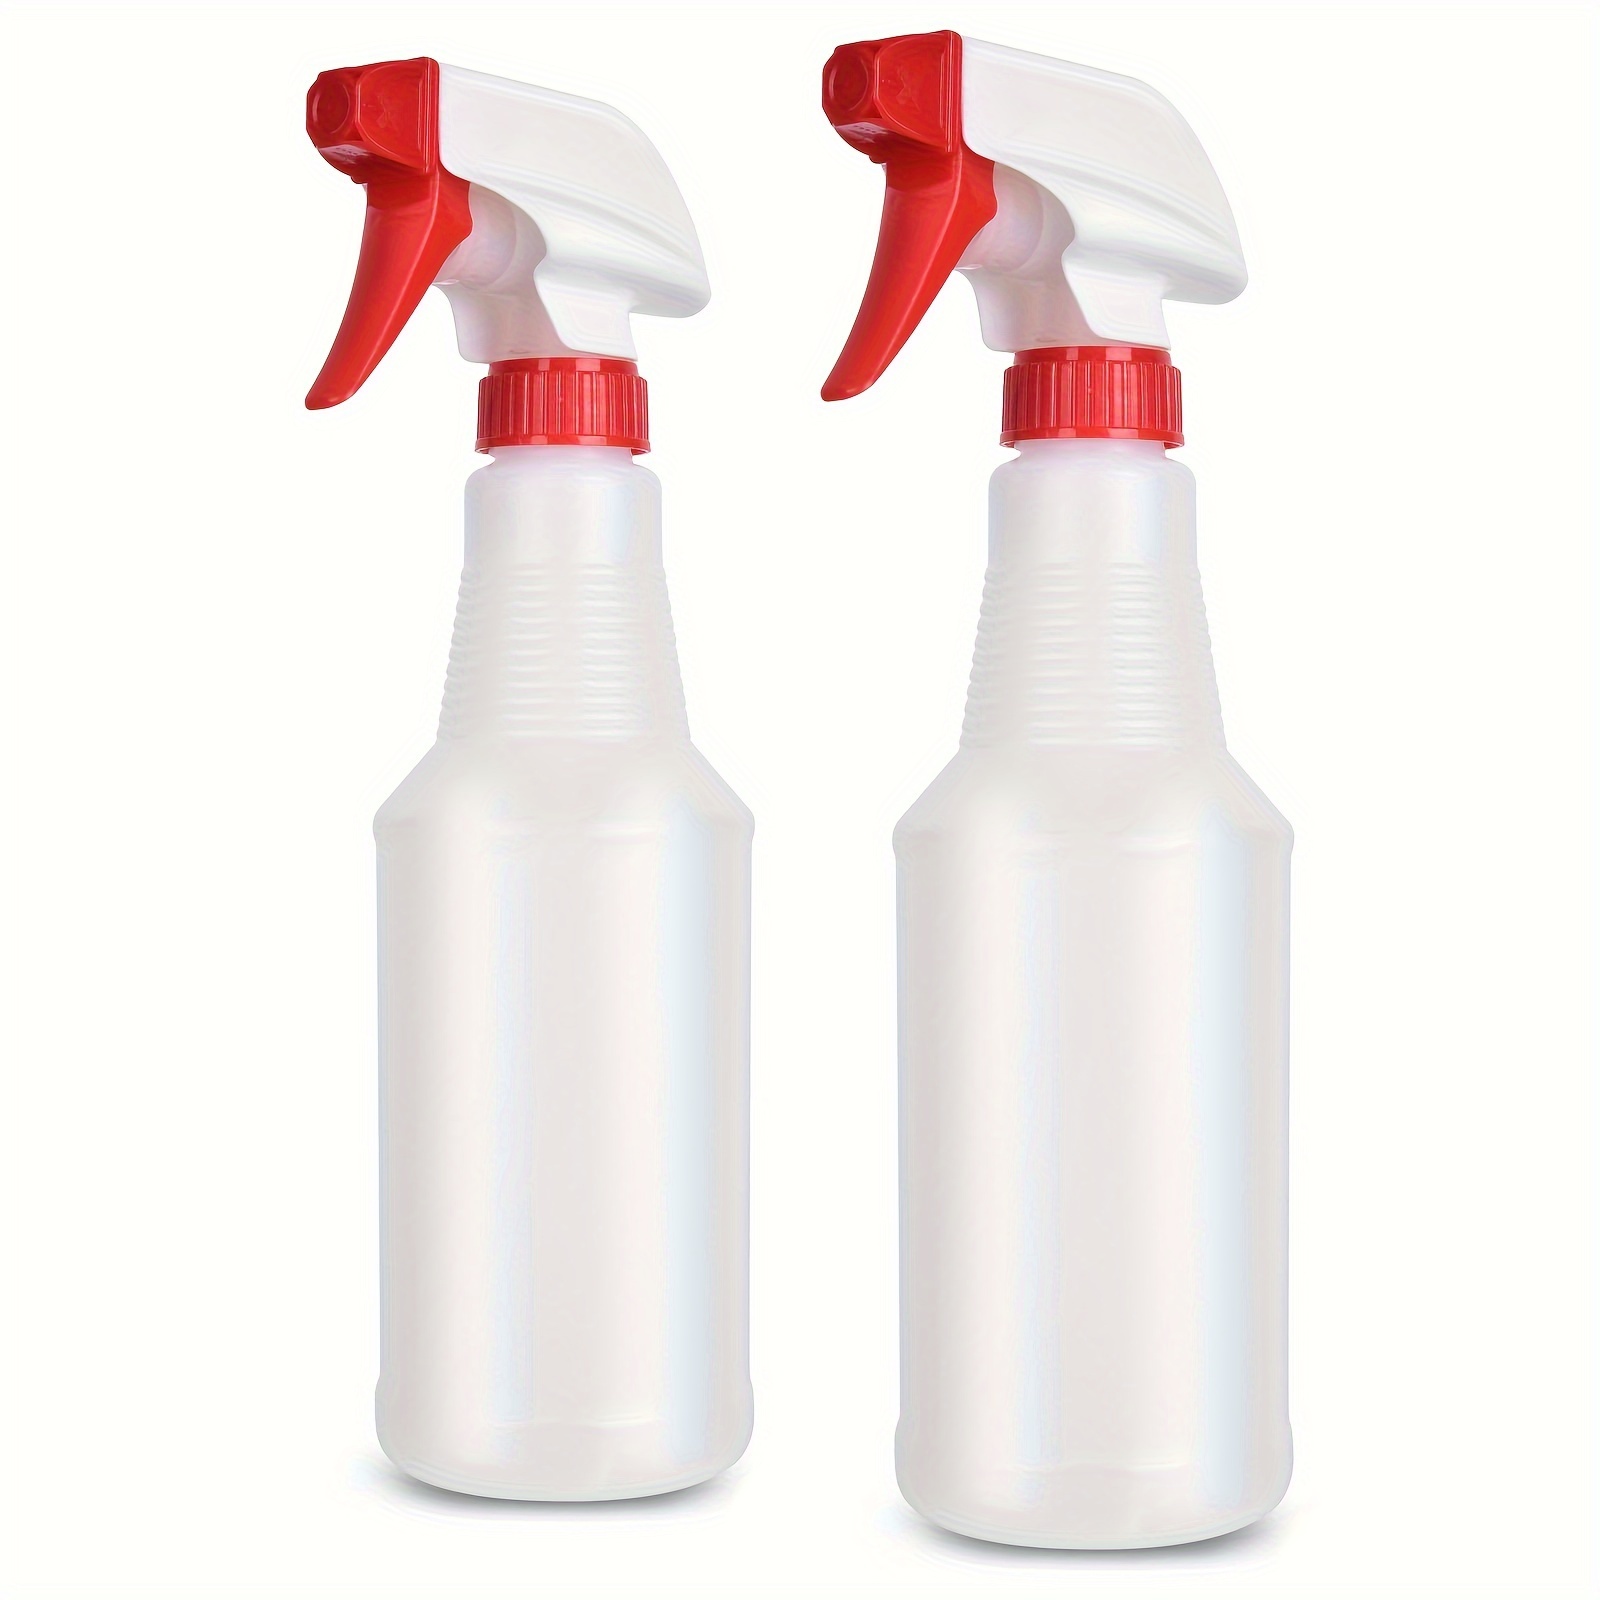 

2-pack Pe Spray Bottles 16 Oz - Leak Proof, Clog Free Adjustable Nozzle, Bpa & Pvc Free, Hdpe #2 Heavy Duty Plastic, Chemical Resistant For Cleaning Solutions, Plants, Pets, , Vinegar & Alcohol